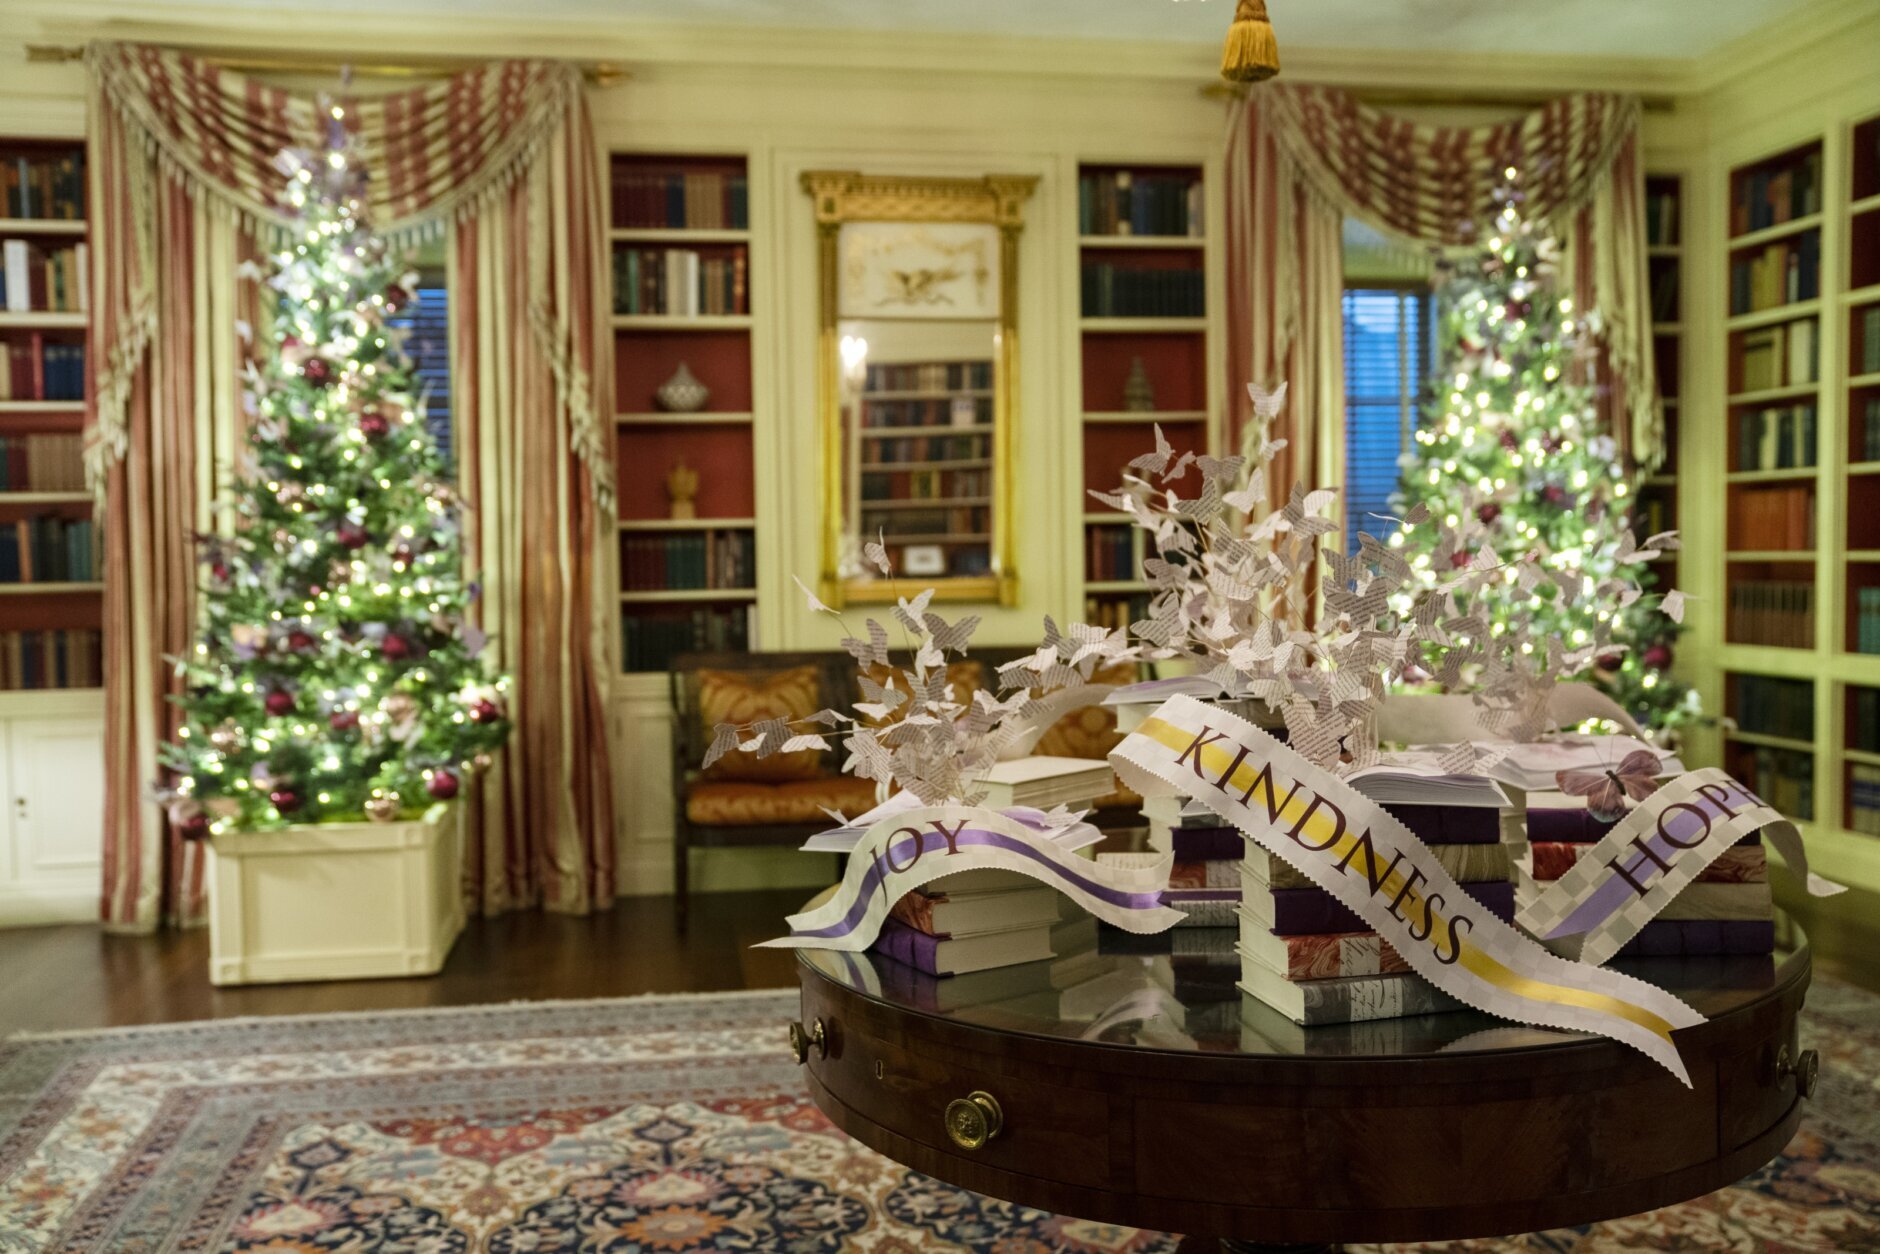 The Vermeil Room of the White House is decorated for the holidays during a press preview of the White House holiday decorations, Monday, Nov. 29, 2021, in Washington. (AP Photo/Evan Vucci)